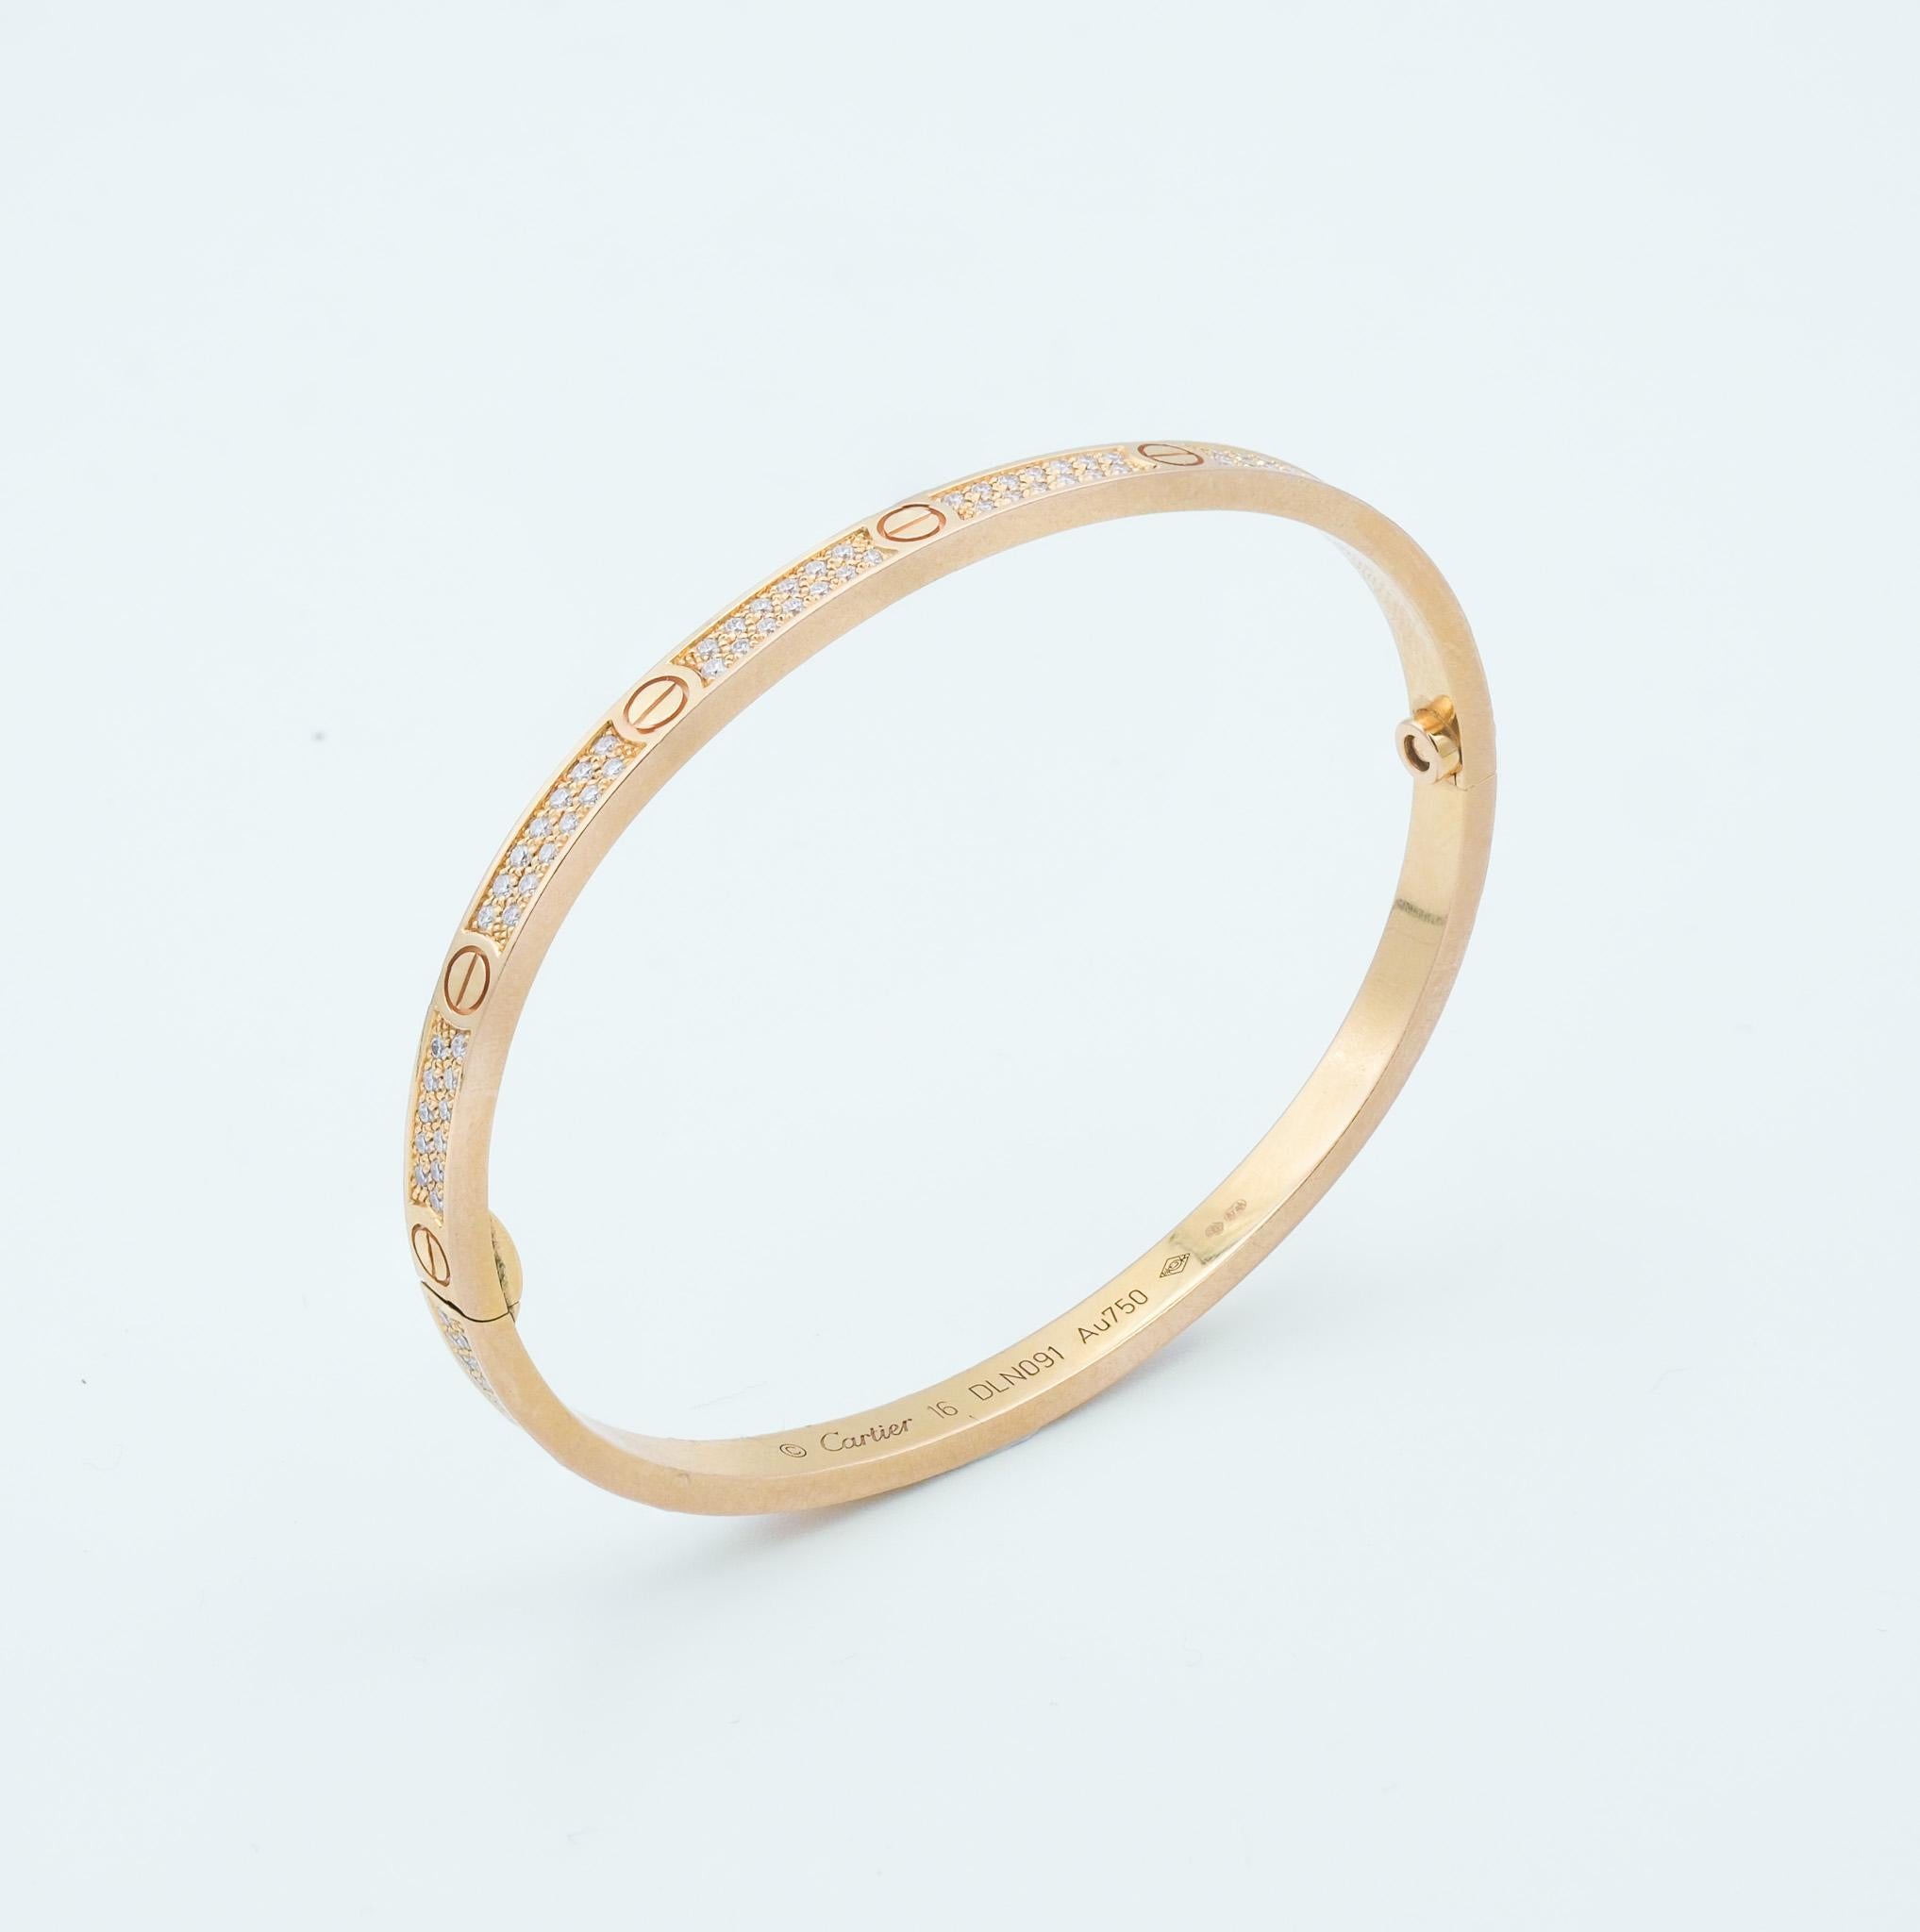 The bracelet presented is an elegant and iconic piece of jewelry from Cartier, known as the Love Bracelet. The bracelet's design features the classic Love collection's motif of screw motifs, which symbolize a sealed and secured bond, adding a